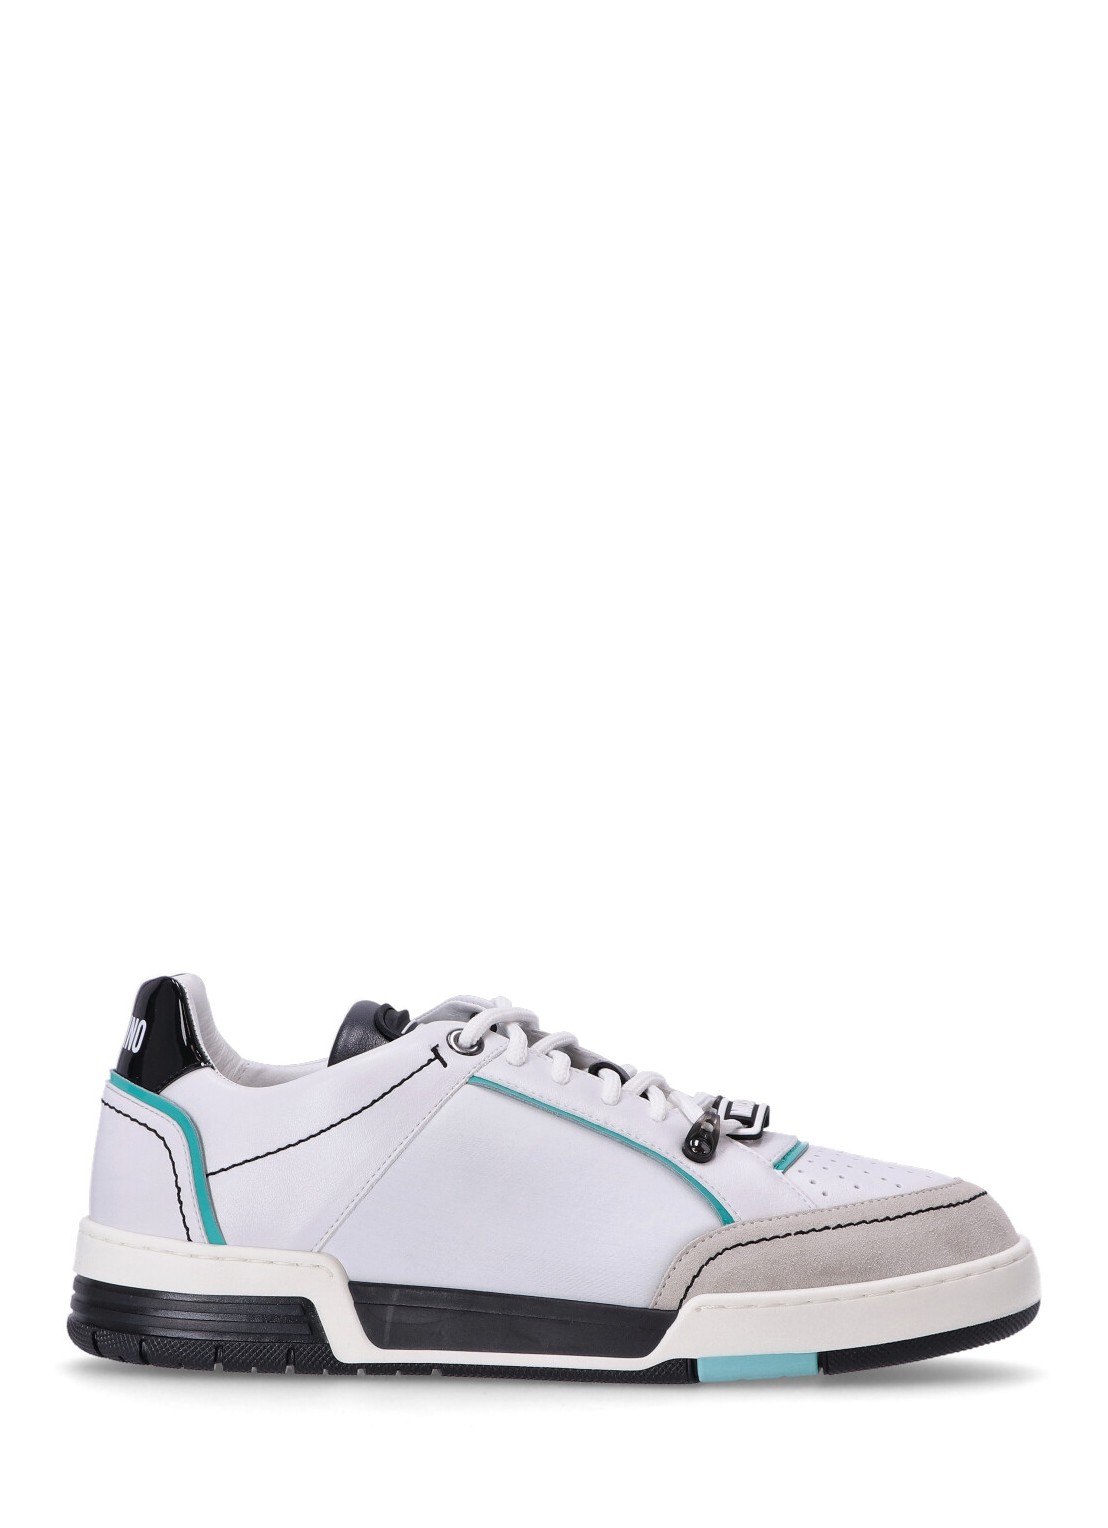 Sneaker moschino couture sneaker man m.sneakers mb15614g1igna 10a talla blanco
 